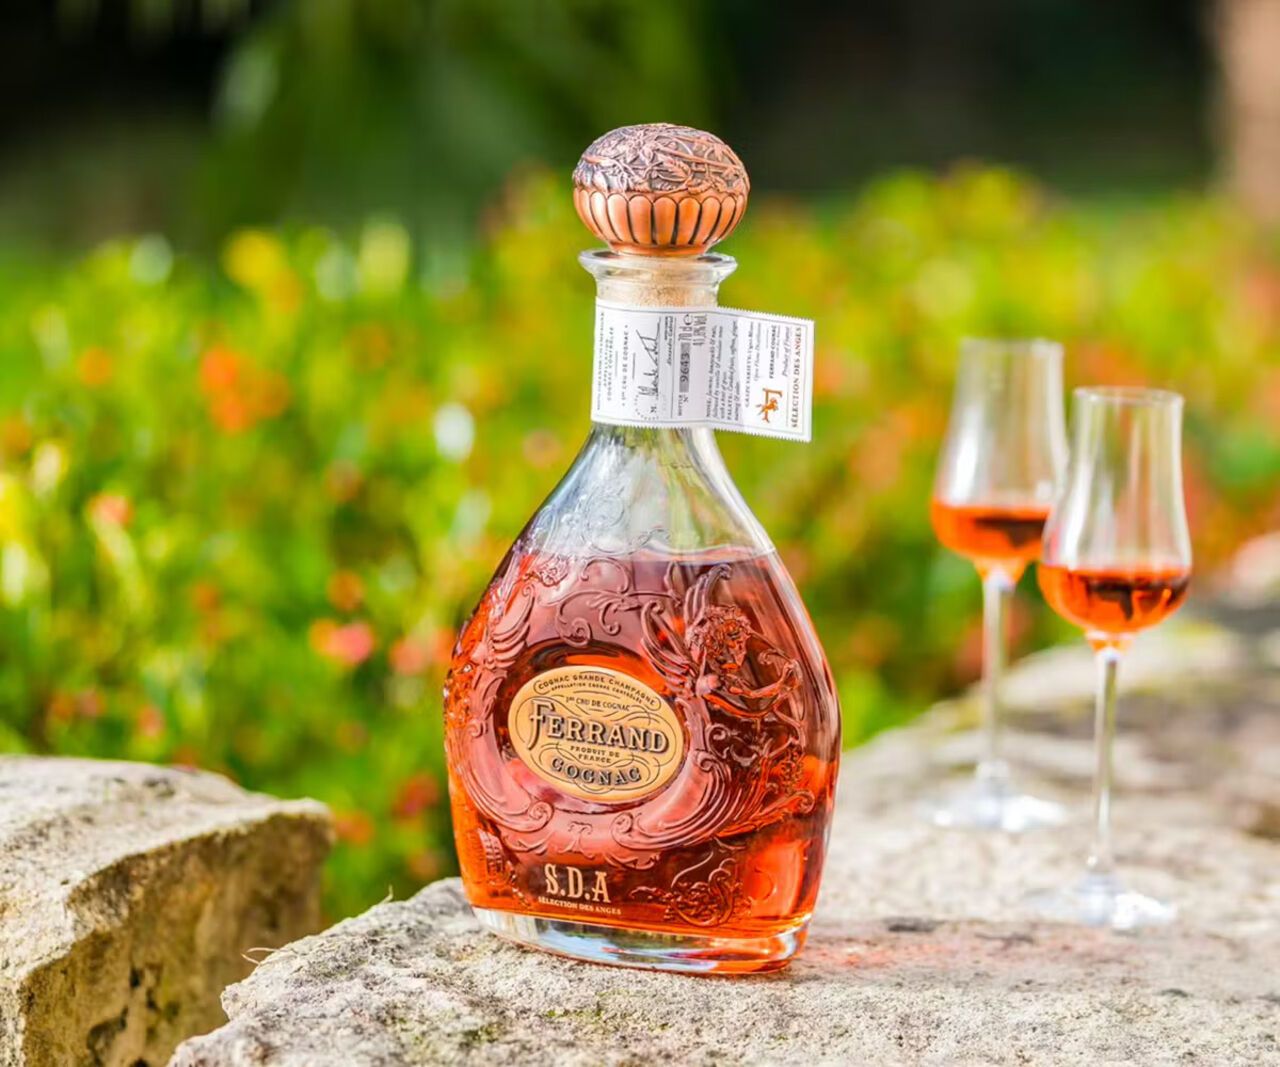 Ferrand Sélection des Anges Cognac wins Gold at the ISC Design and Packaging Awards!